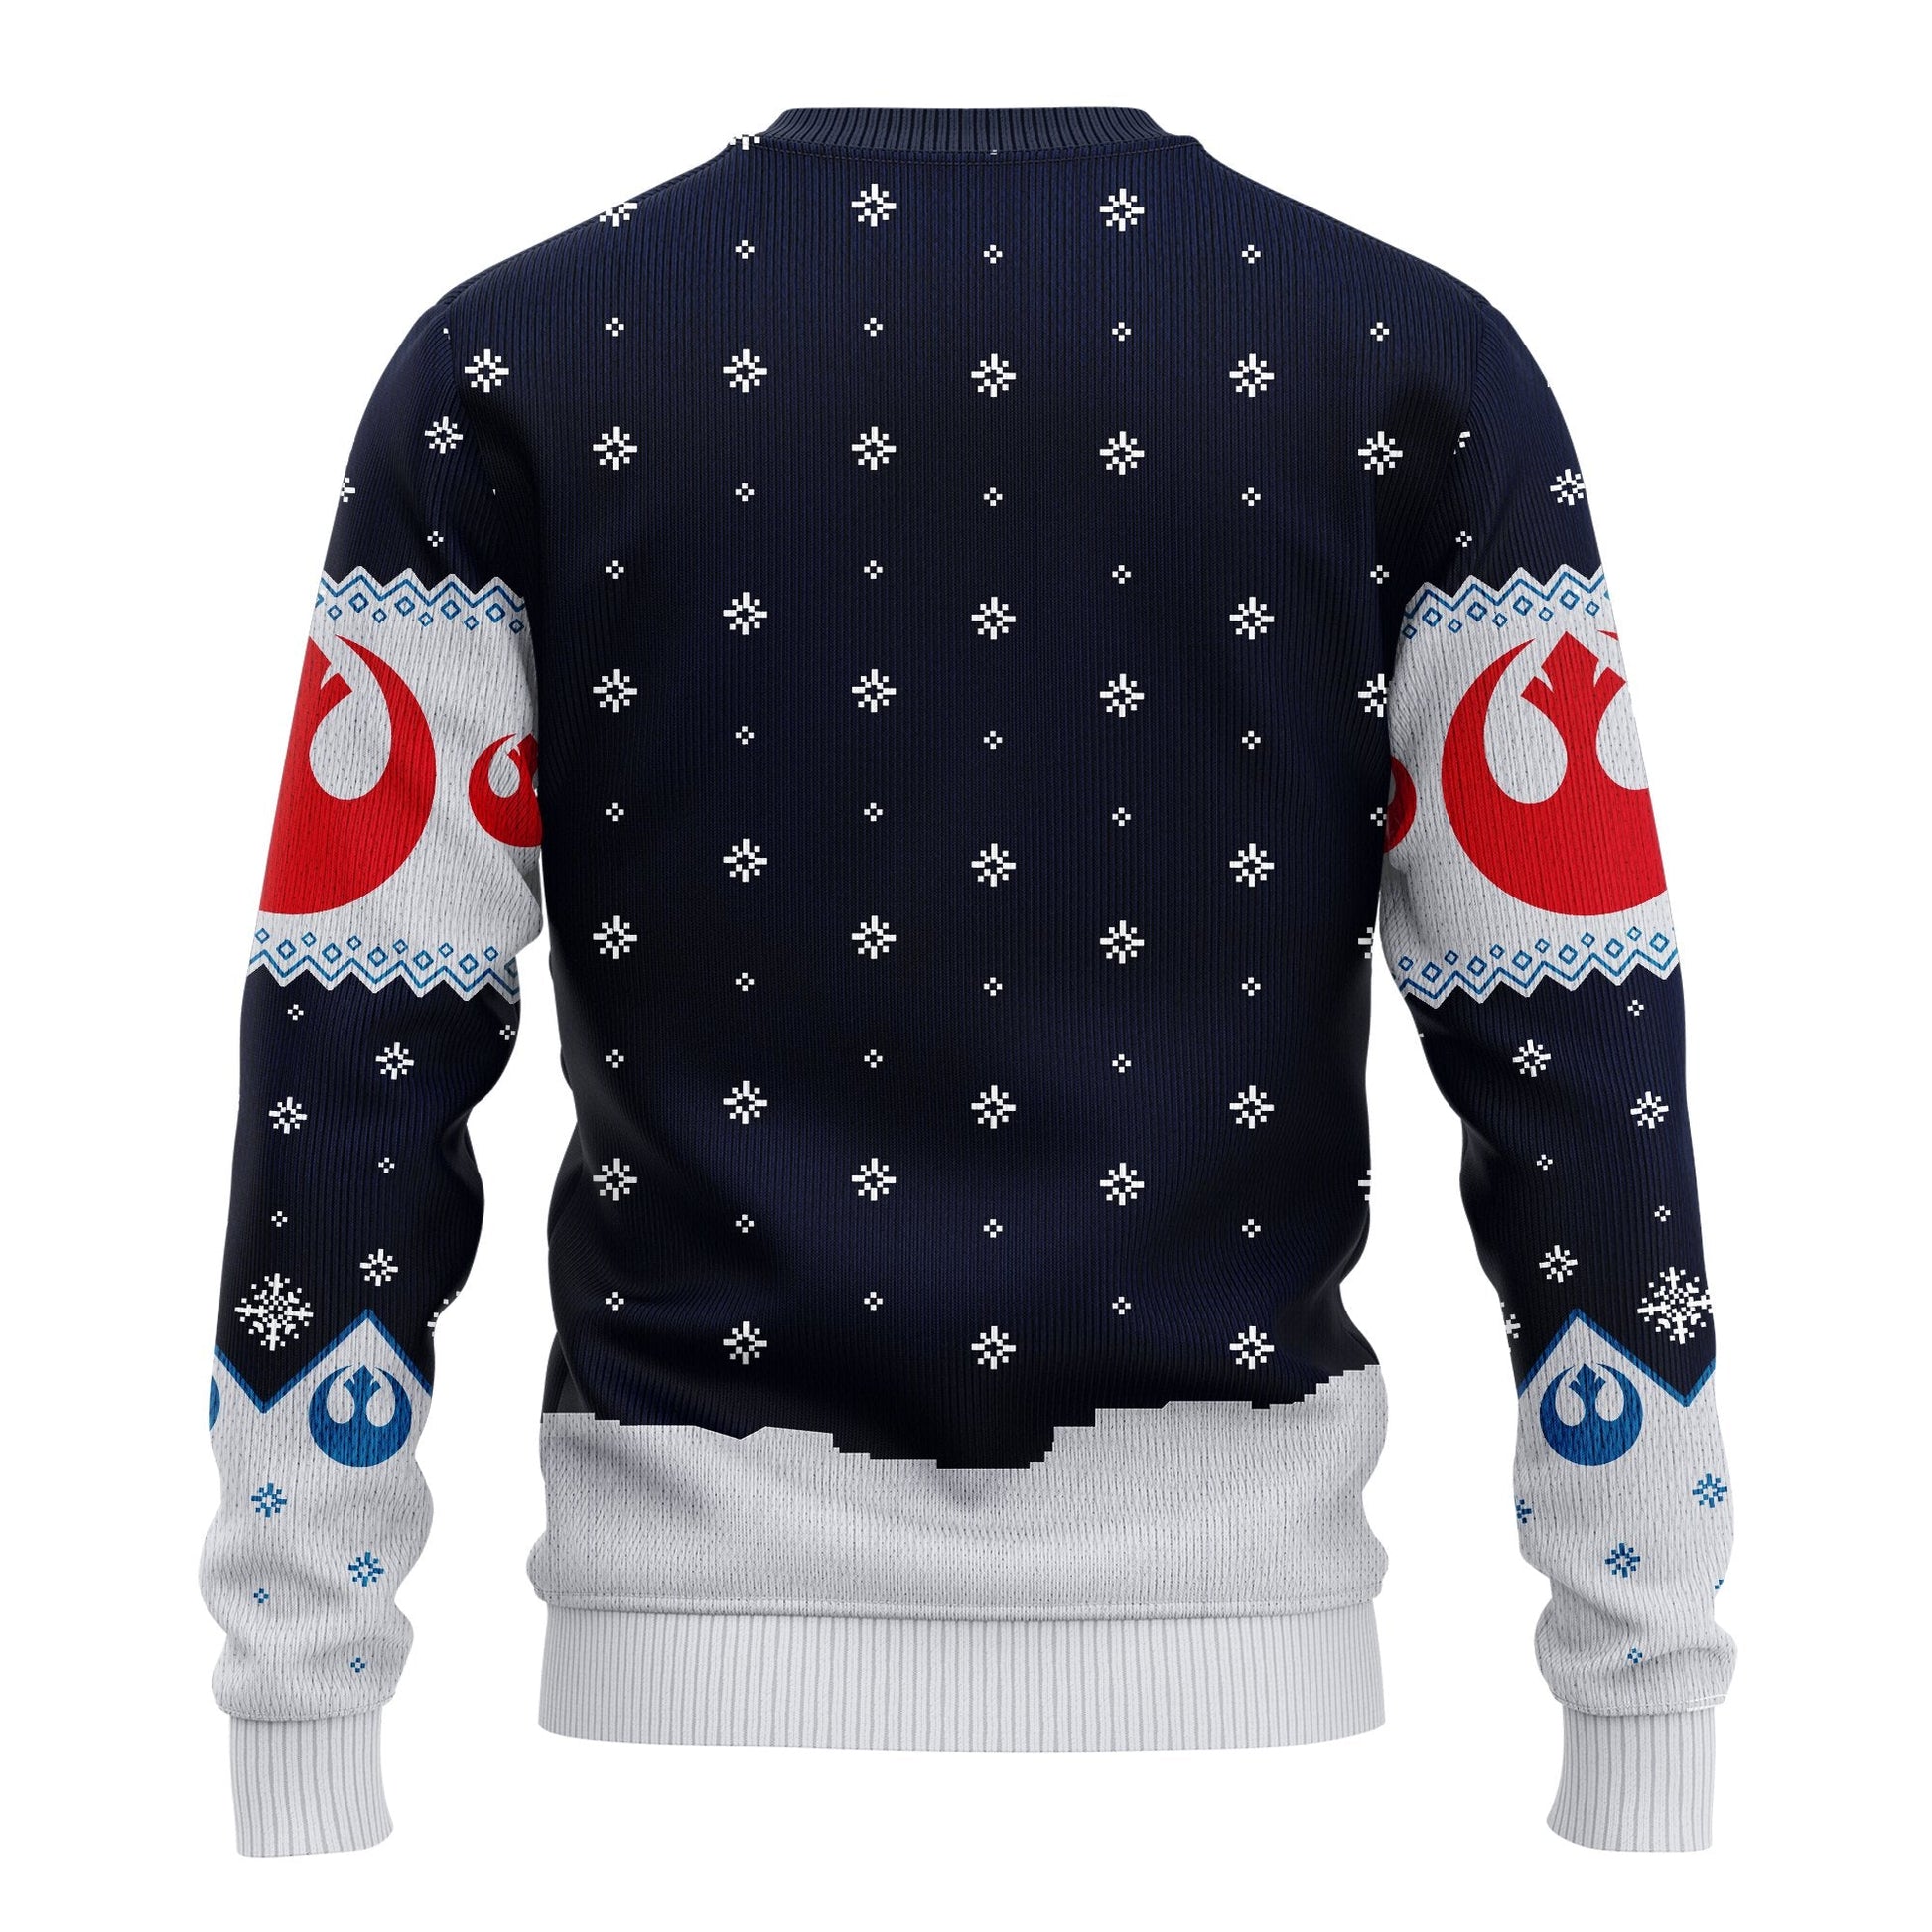 SW Christmas Sweater All I Want For Christmas Is R2 Blue White Ugly Sweater